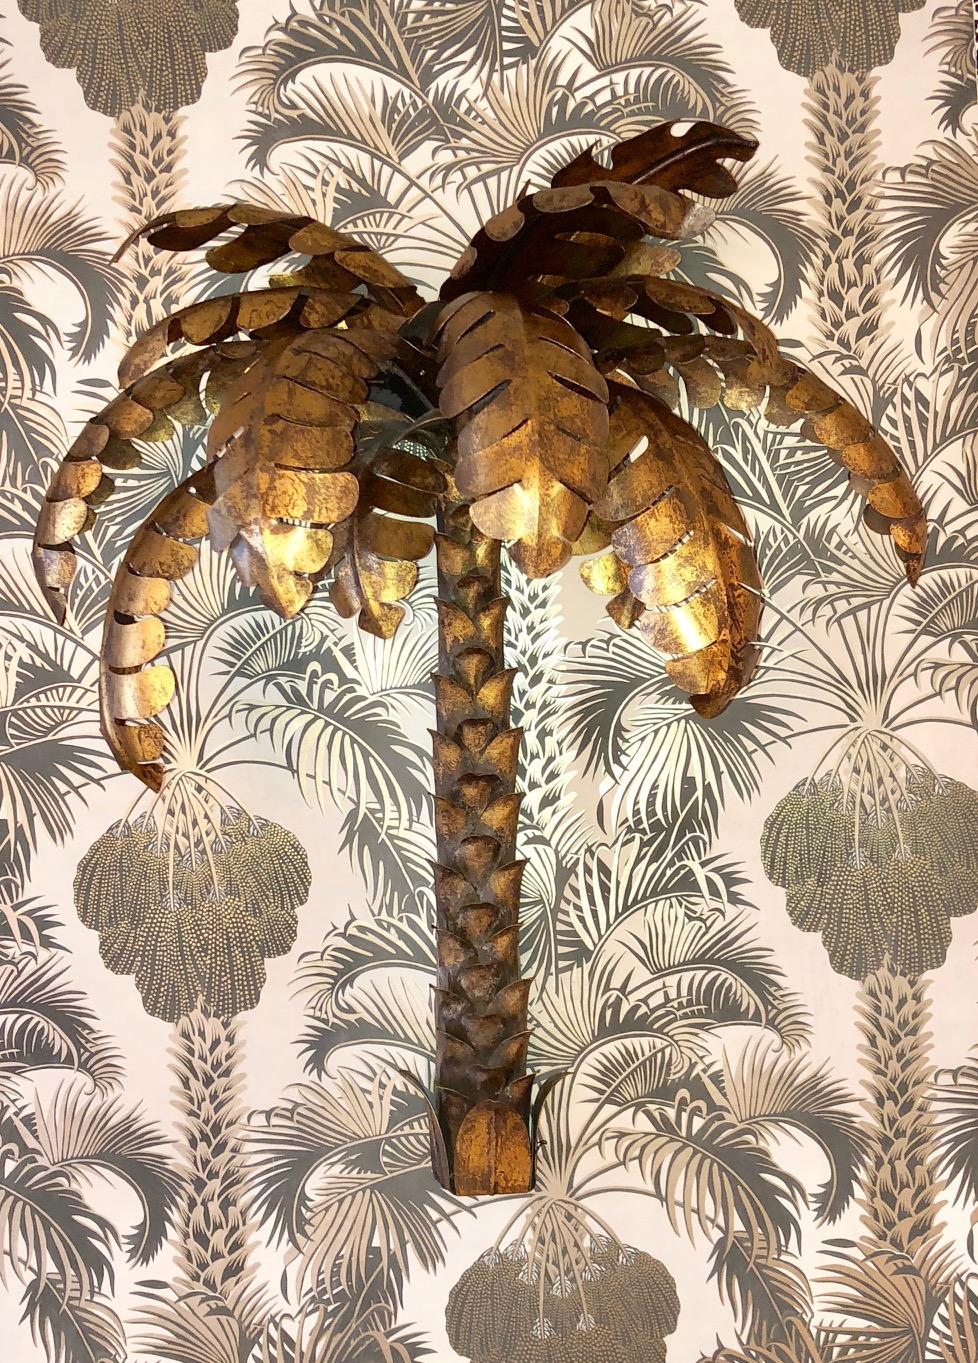 Brass metal palm wall sconces, can be wired for lights. Each palm leaf is detachable and individually placed on top part.